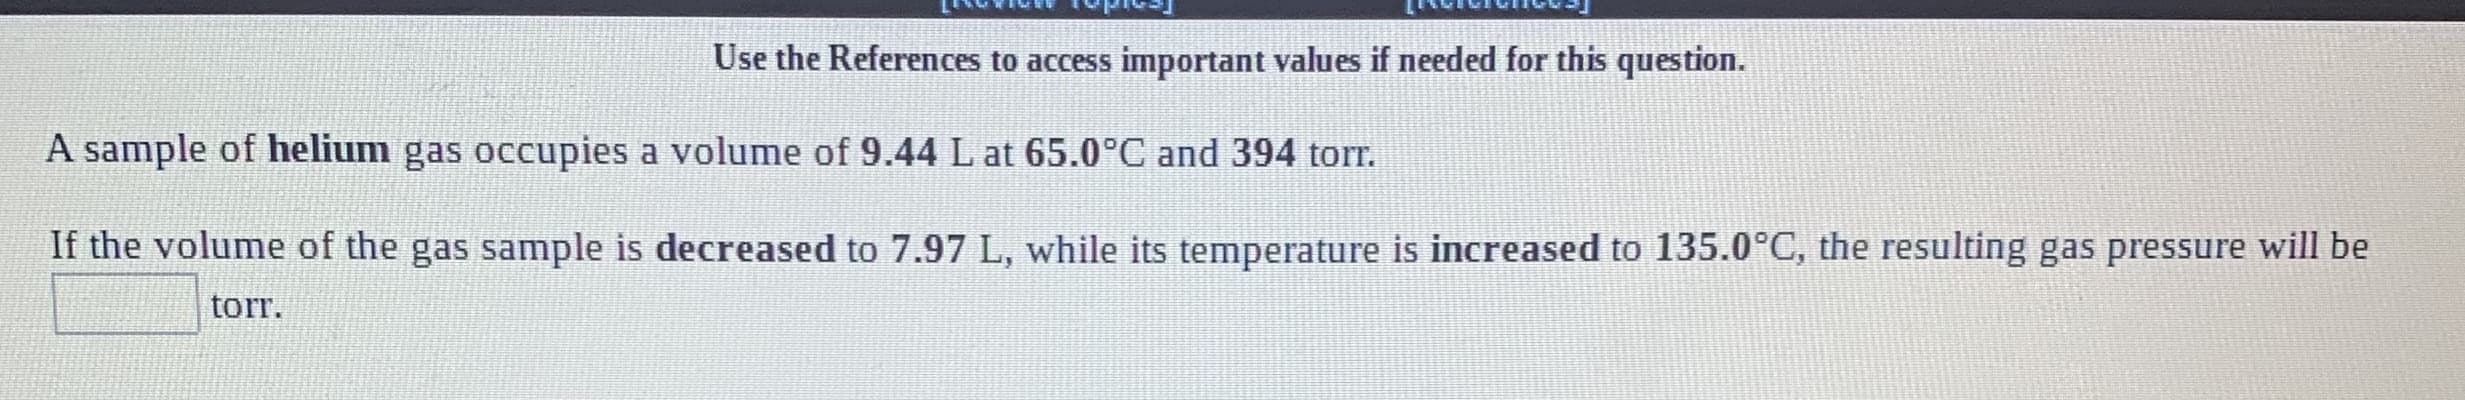 LEWIVIVITVva)
Use the References to access important values if needed for this question.
A sample of helium gas occupies a volume of 9.44 L at 65.0°C and 394 tor.
If the volume of the gas sample is decreased to 7.97 L, while its temperature is increased to 135.0°C, the resulting gas pressure will be
torr.
